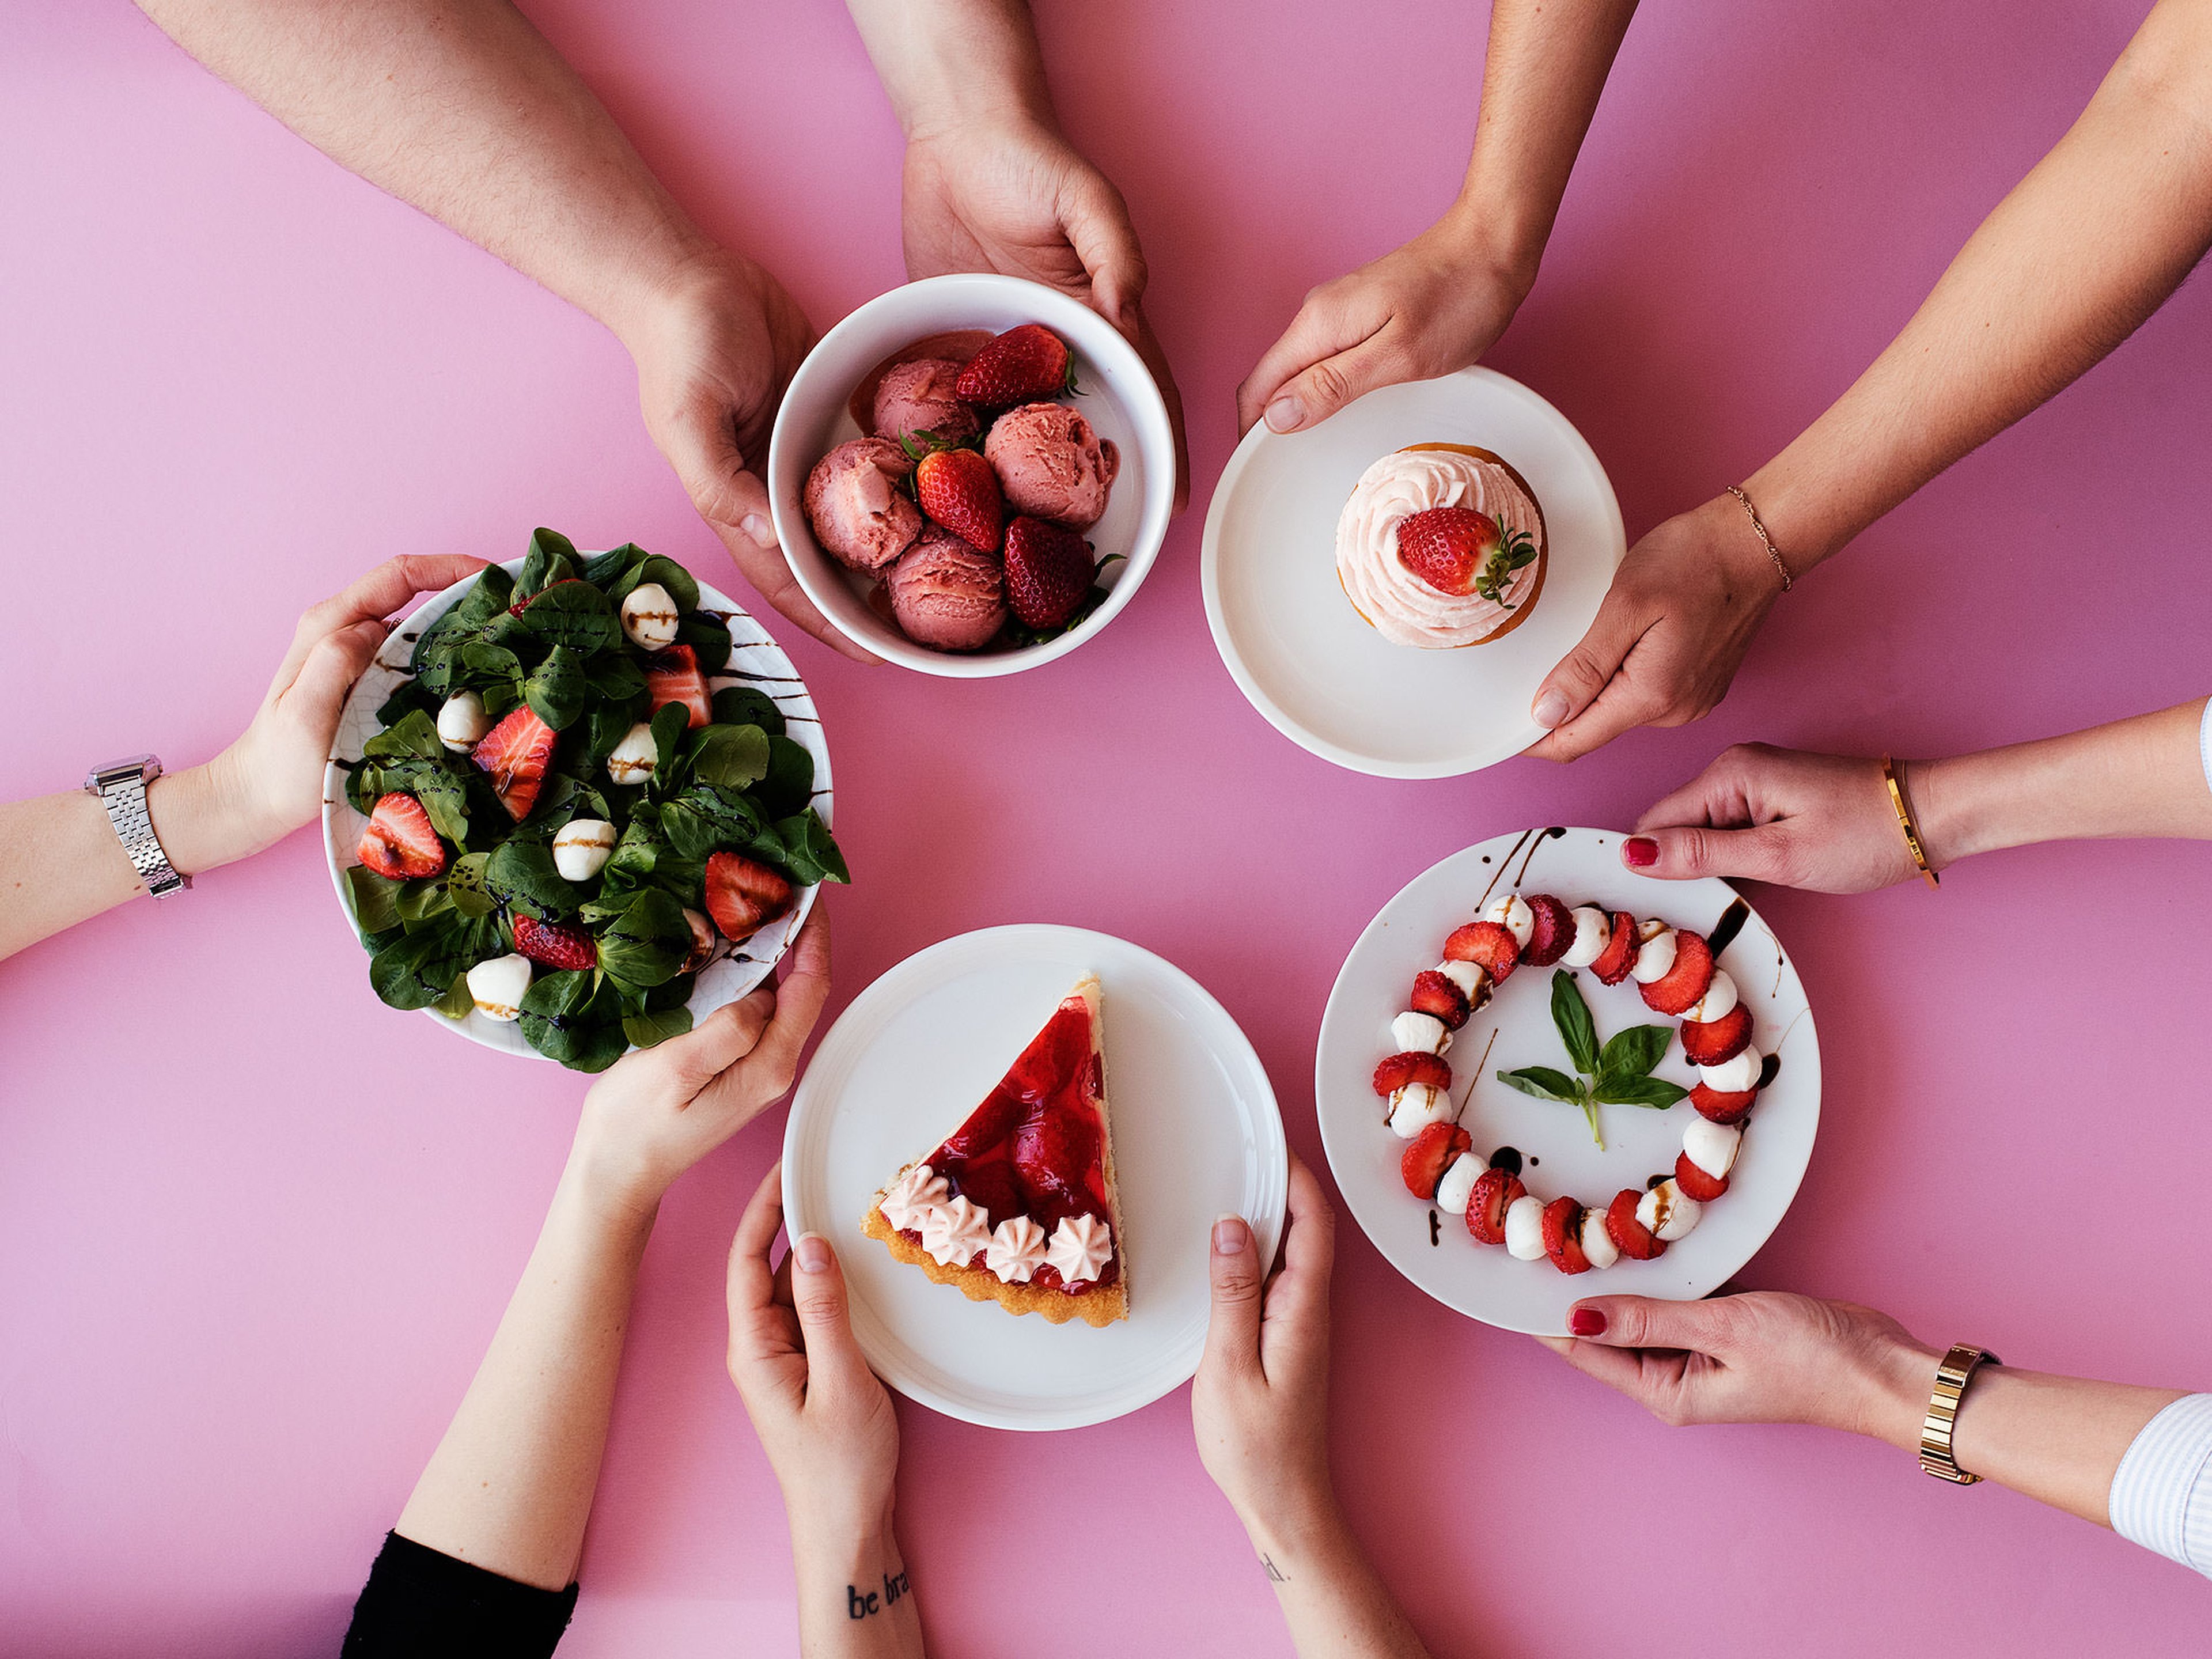 Community Contest: Send Us Your Best Strawberry Recipes